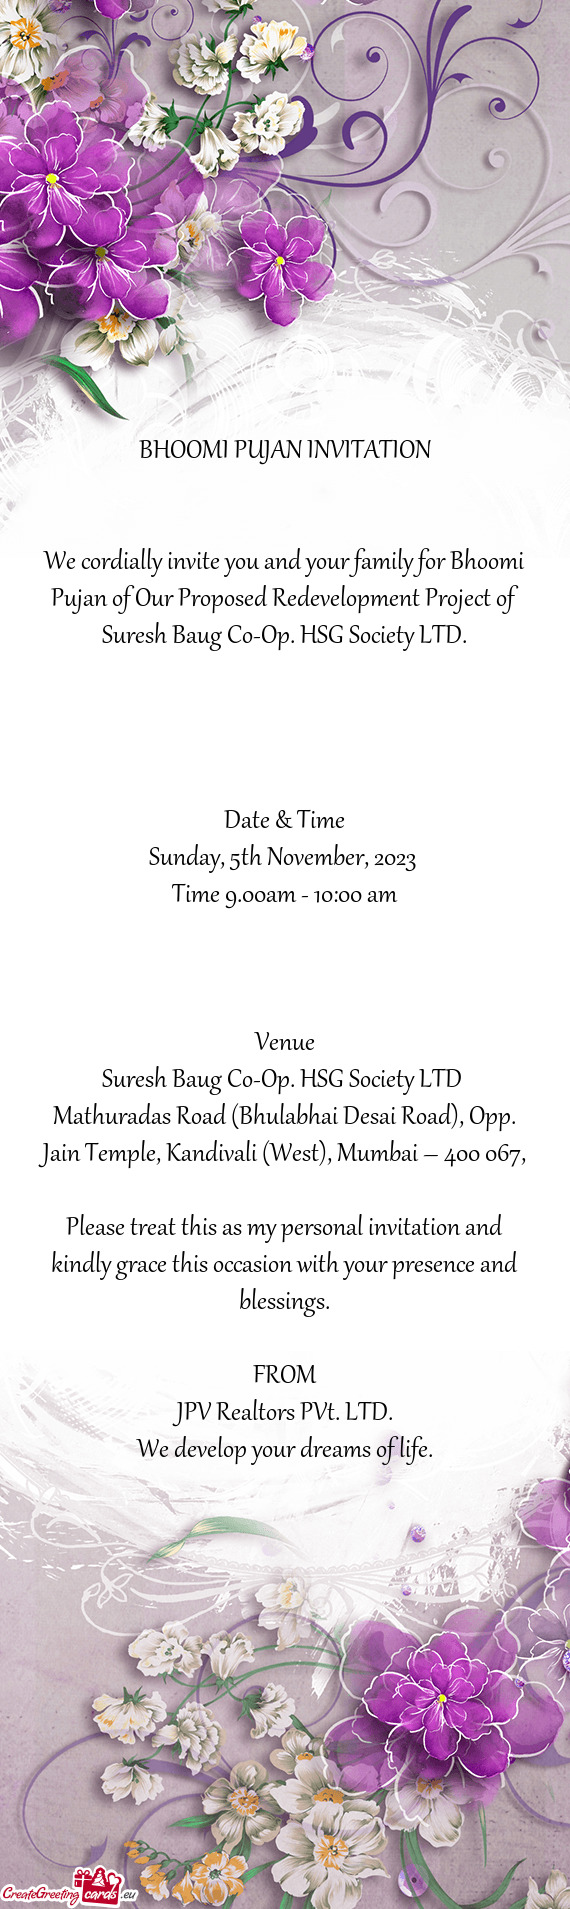 We cordially invite you and your family for Bhoomi Pujan of Our Proposed Redevelopment Project of Su